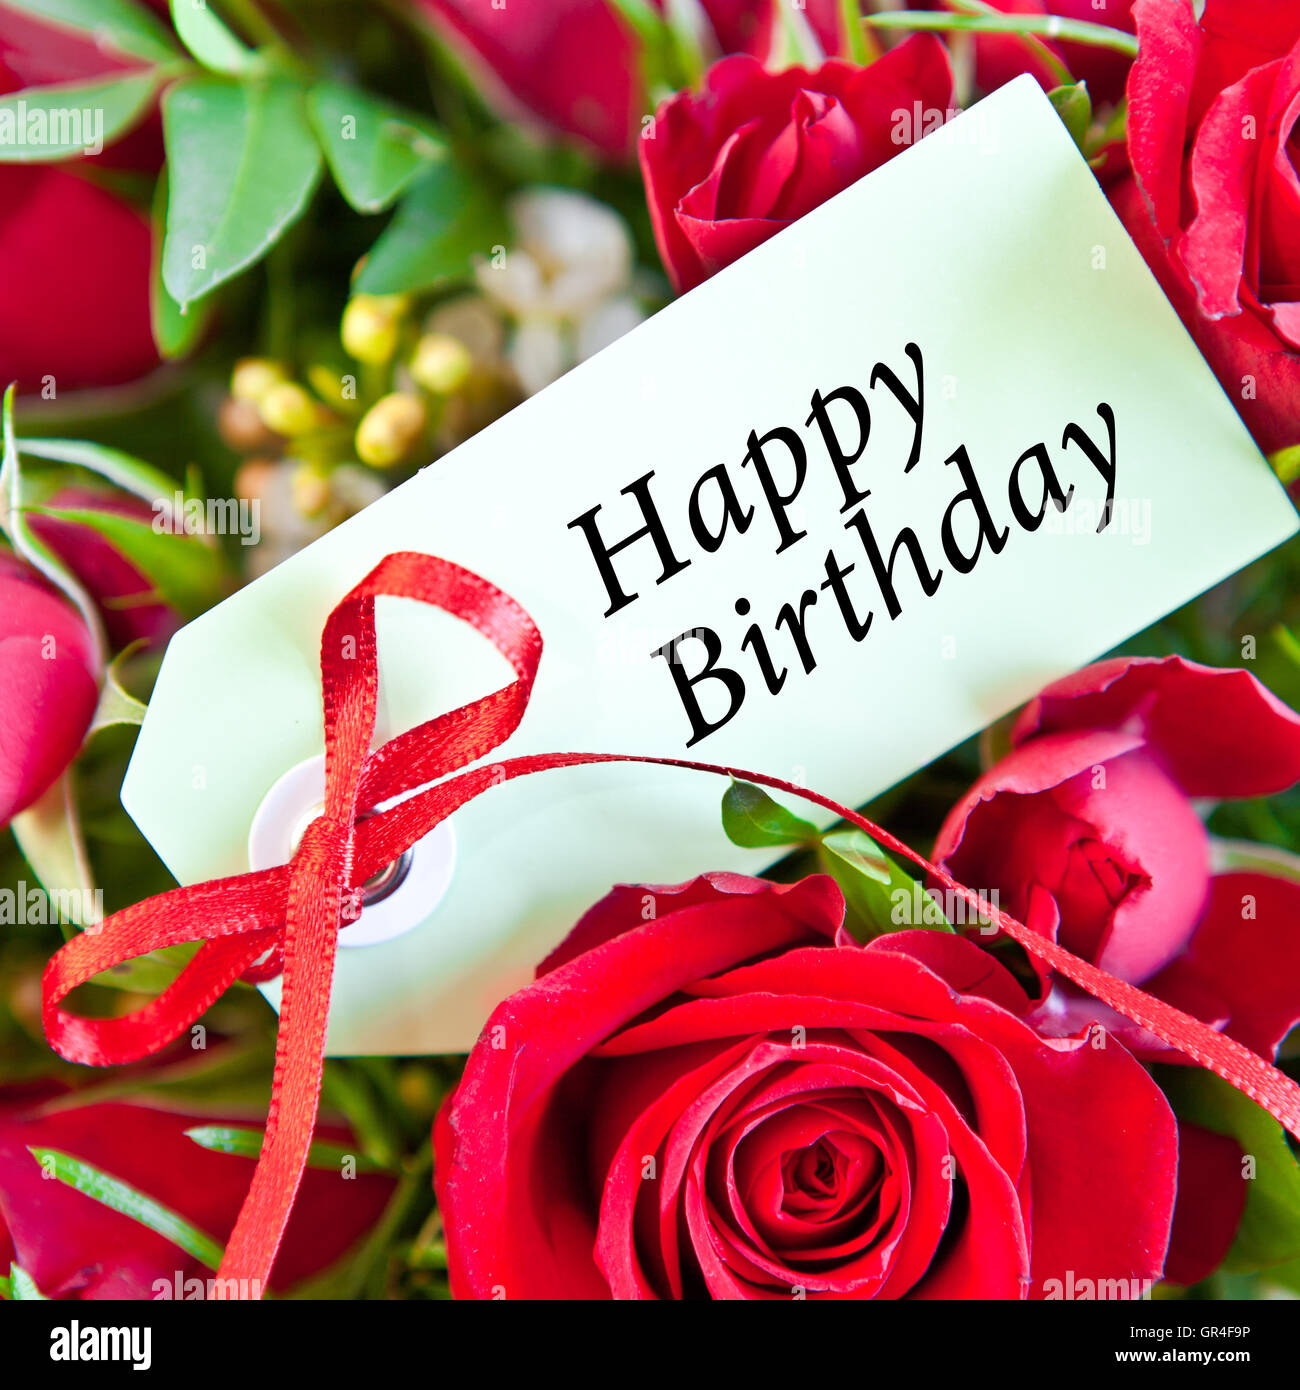 Red Roses for a happy birthday Stock Photo: 117499138 - Alamy